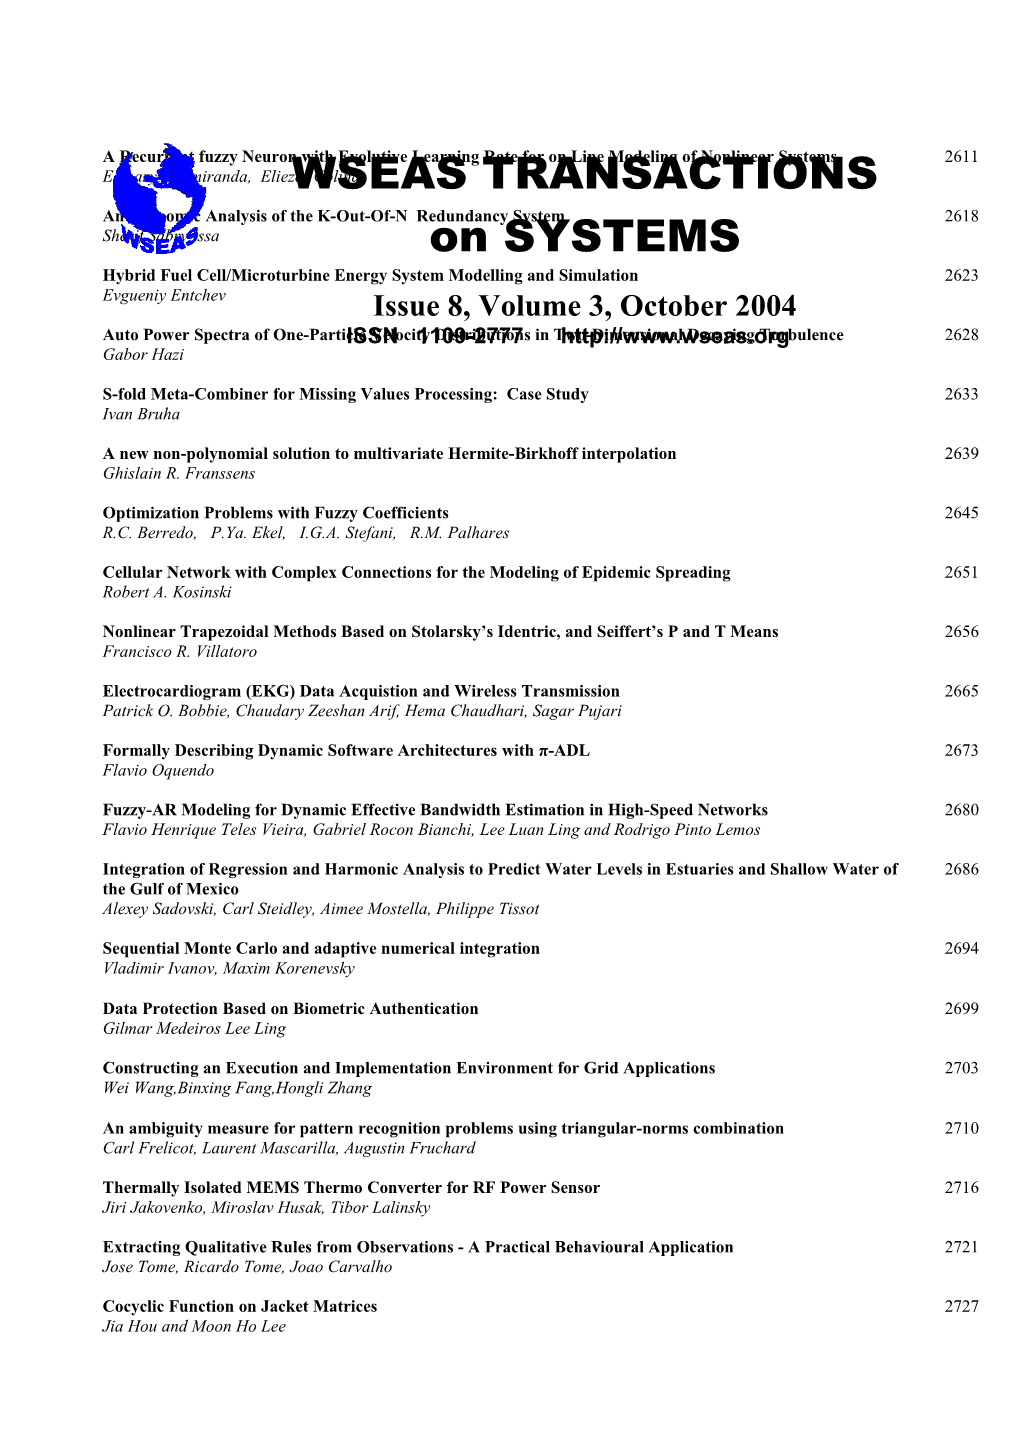 WSEAS Trans. on SYSTEMS, October 2004